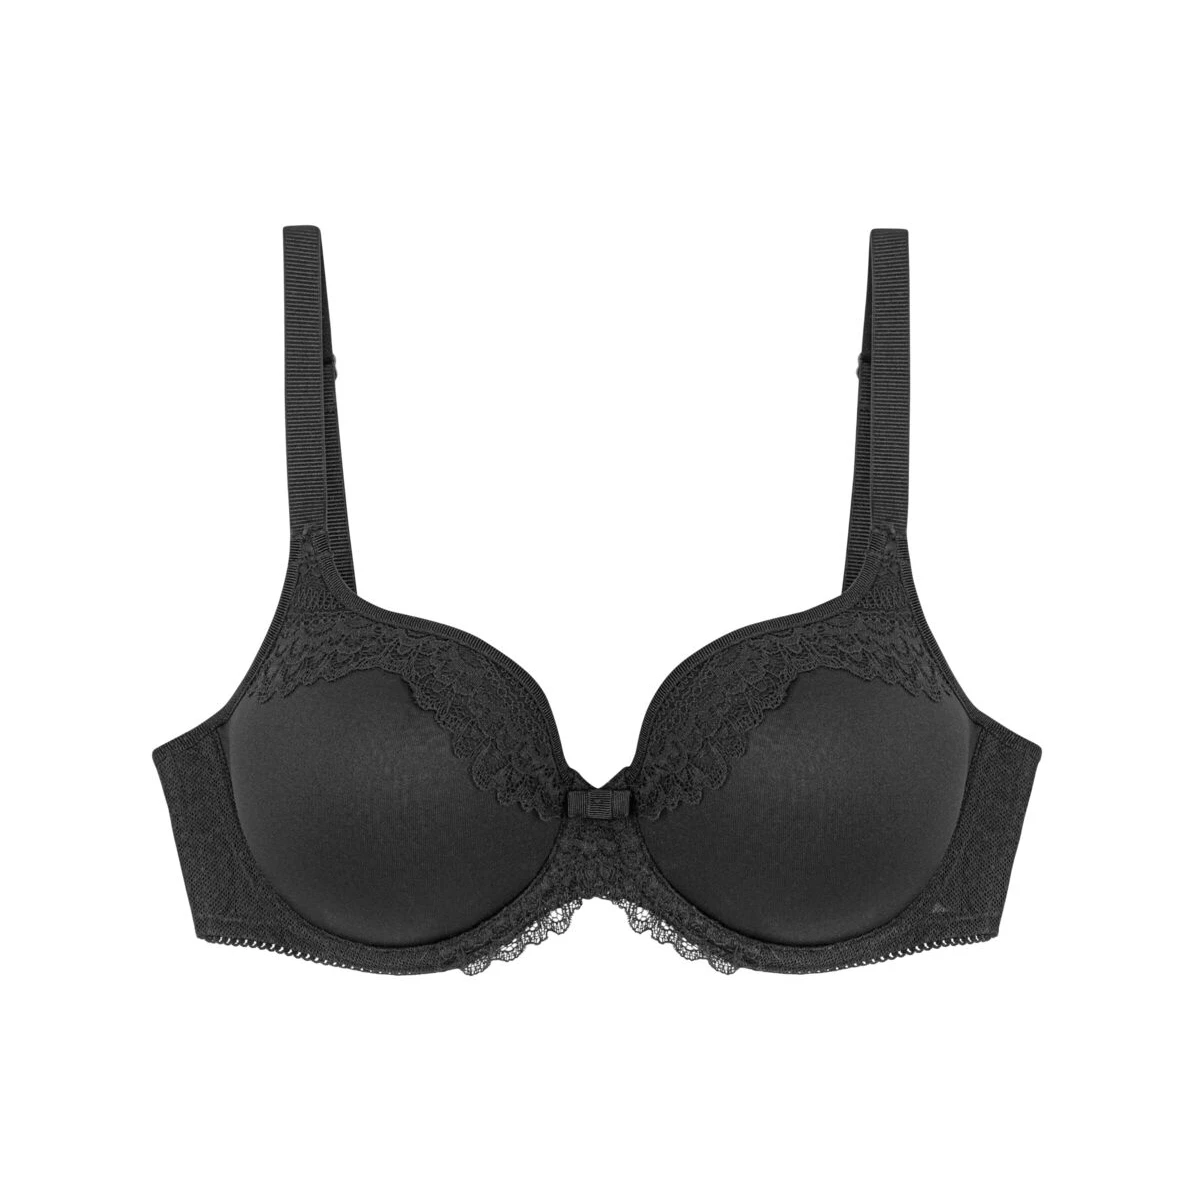 La Comfort Lingerie Store - As the name suggests, our full coverage Beauty- full Idol bra keeps you supported all day long. #TriumphLingerie  #TriumphBra